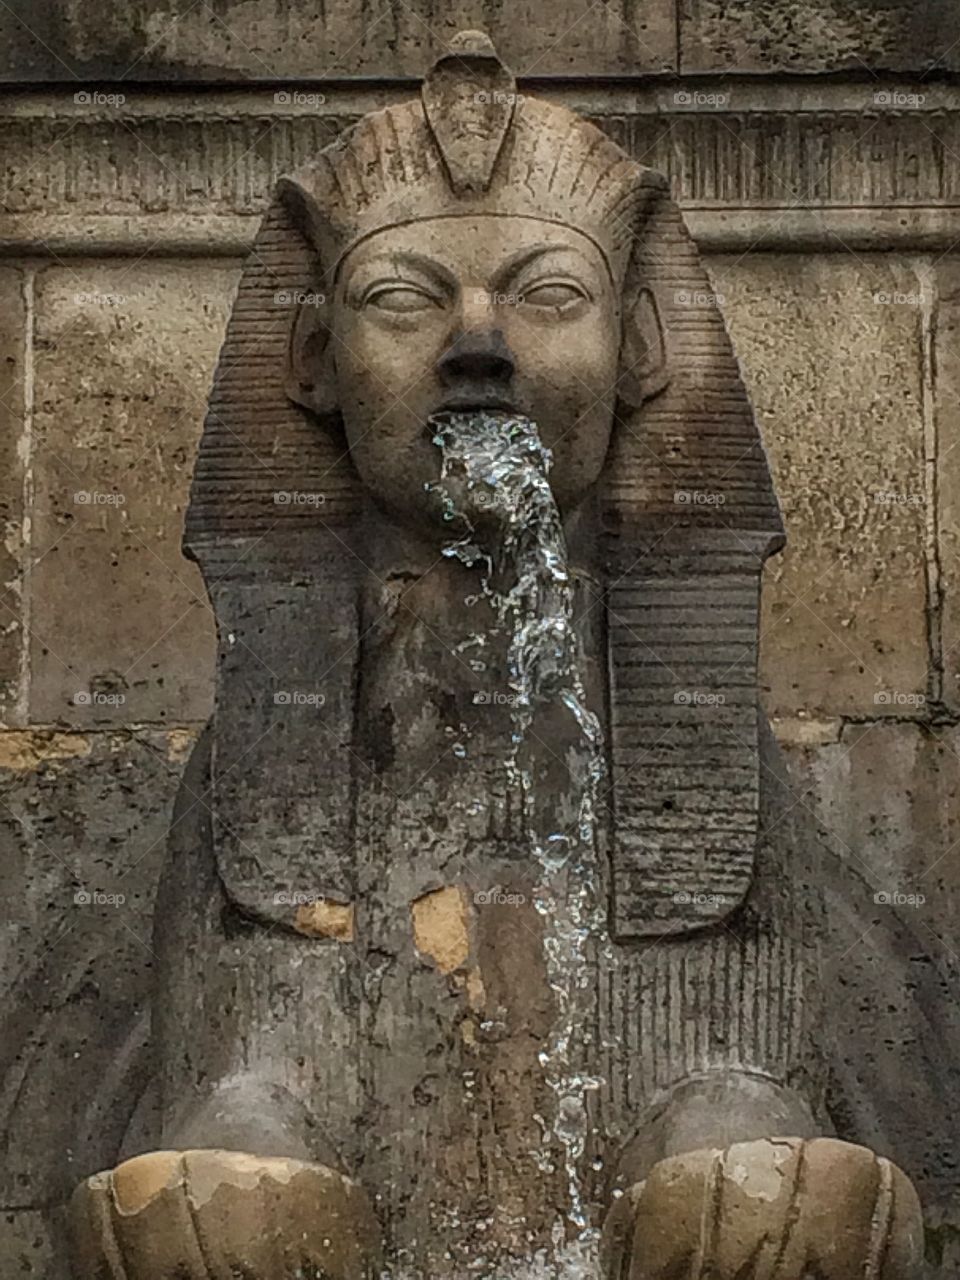 Egyptian water fountain (Paris - France) | Photo with iPhone 5S.